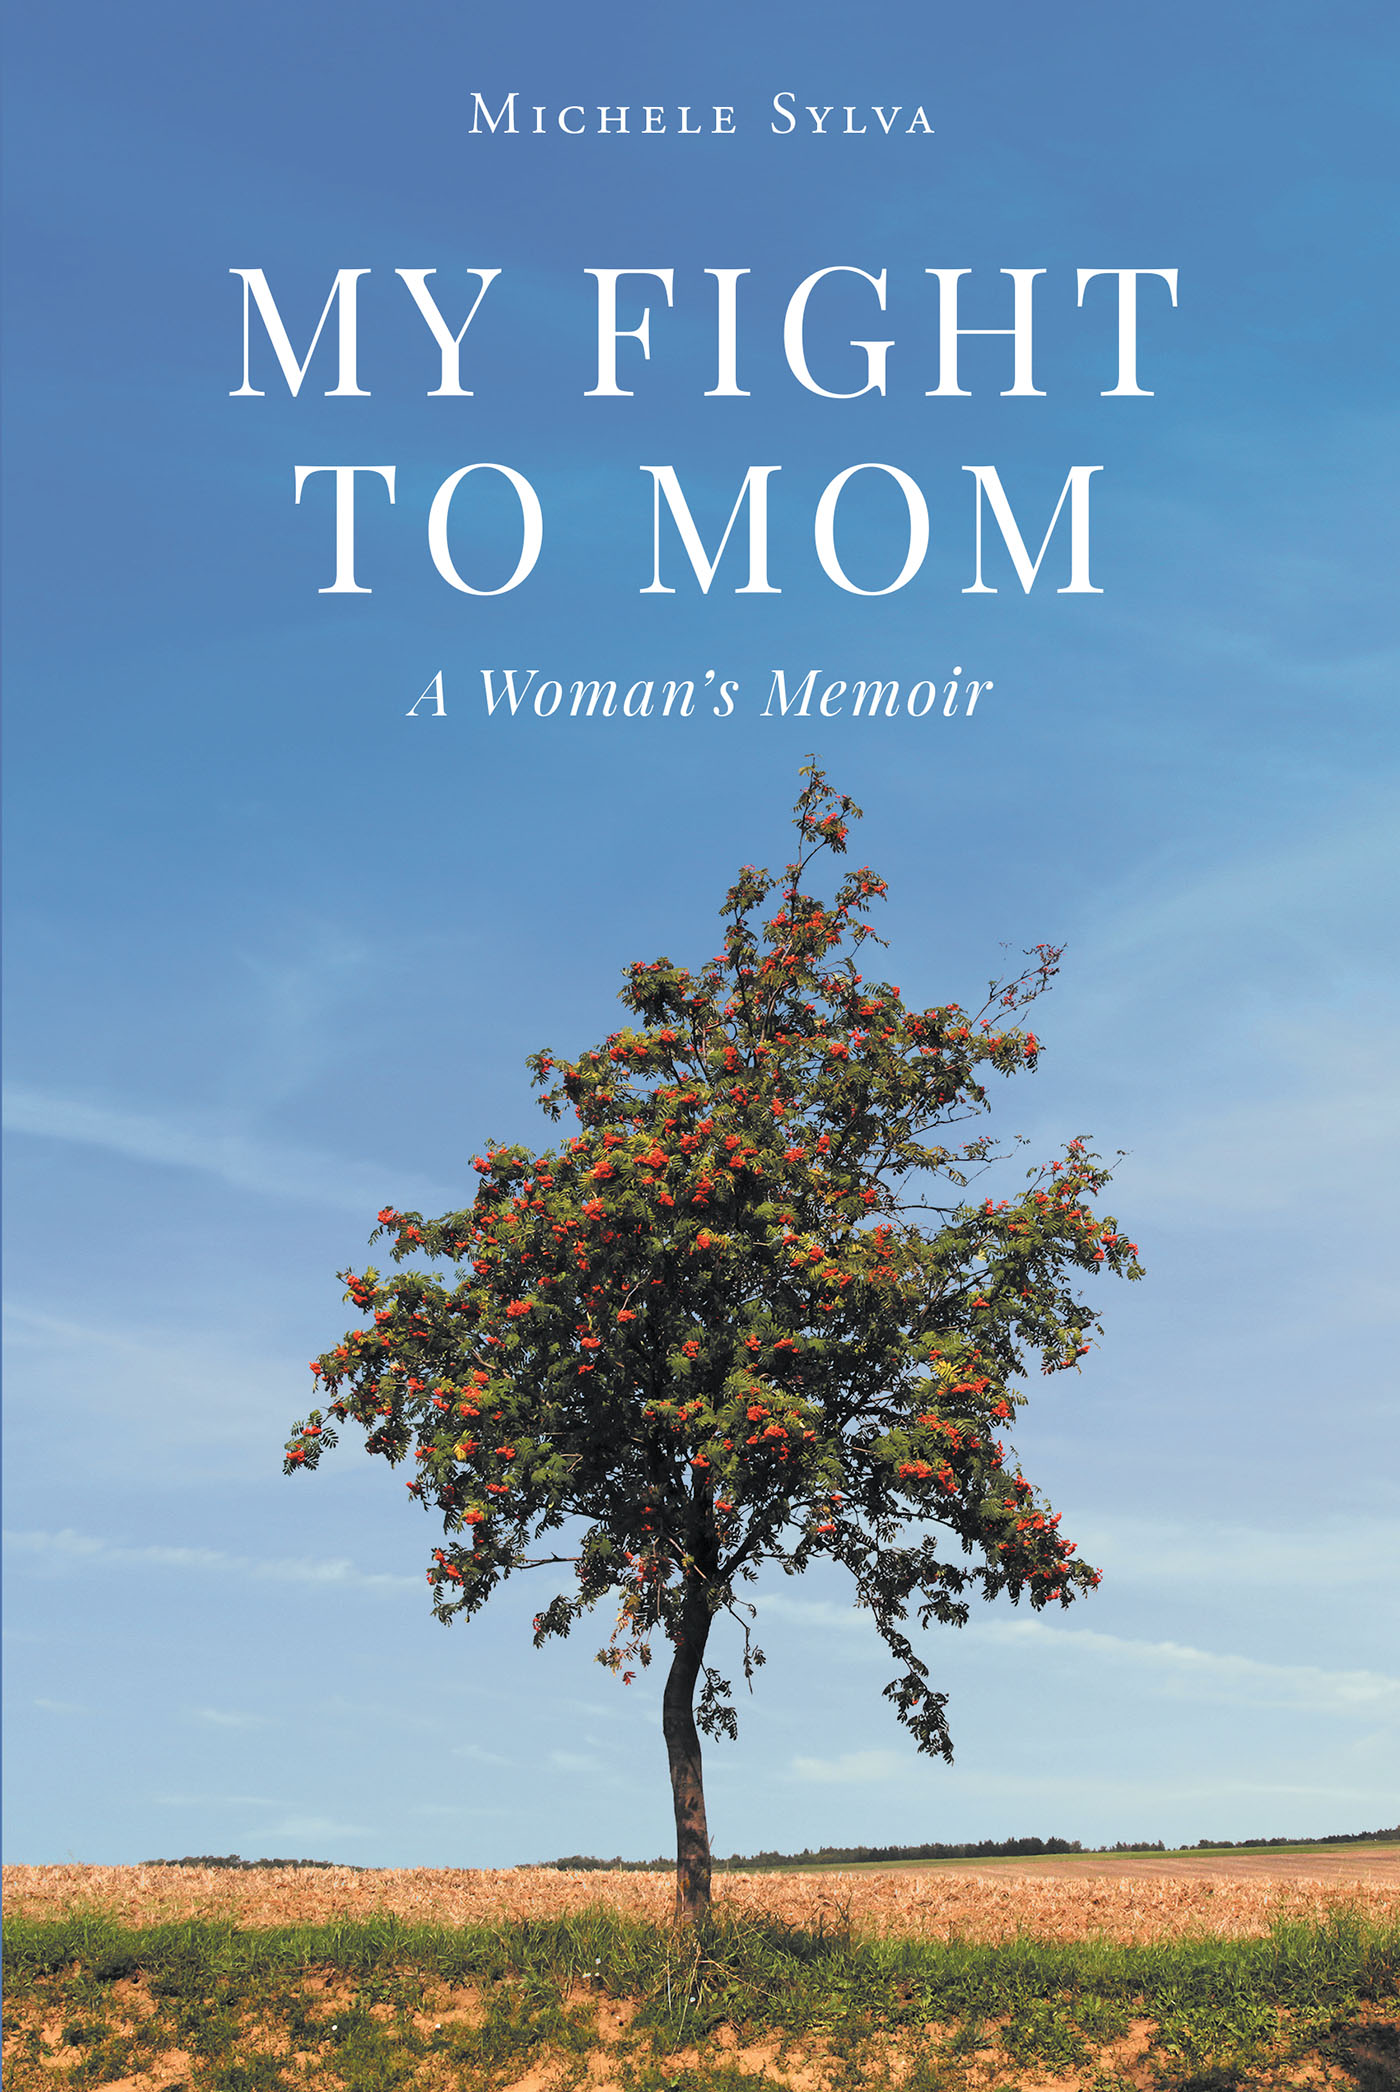 Author Michele Sylva’s New Book "My Fight to Mom: A Woman's Memoir" is a Heartfelt Story That Reveals the Perseverance the Author Showed on Her Path to Becoming a Mother